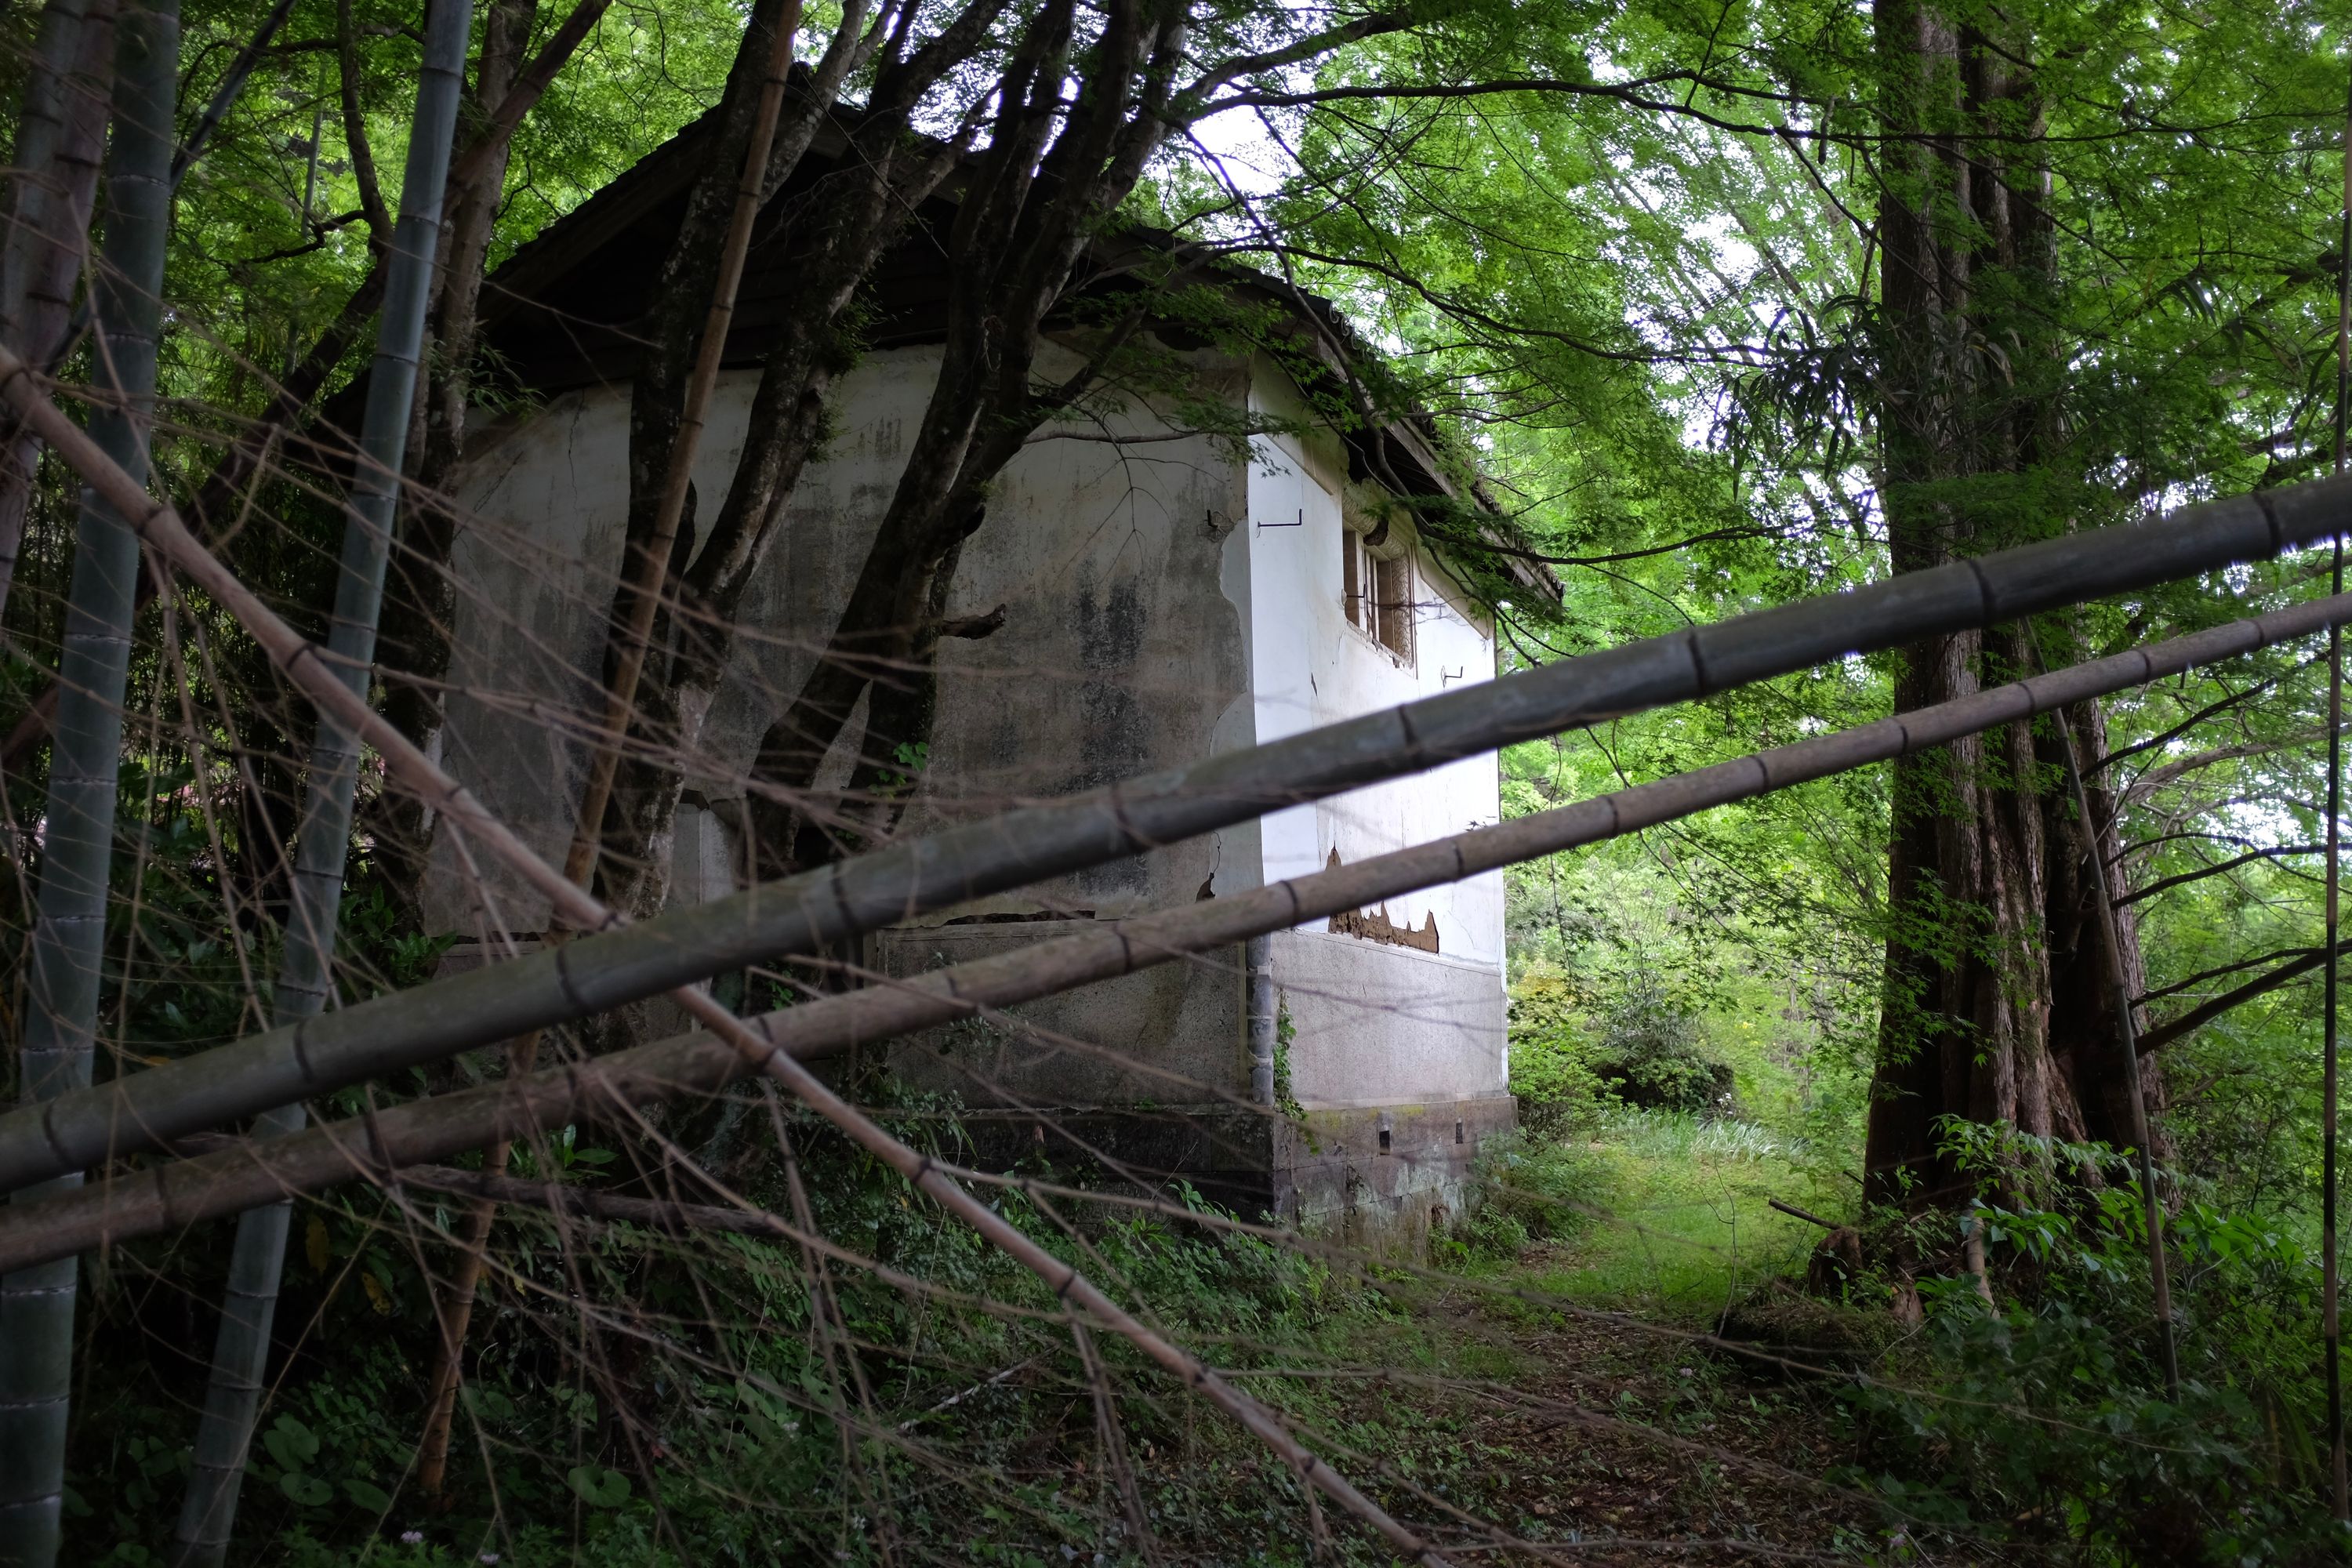 An abandoned-looking white house in an overgrown plot.